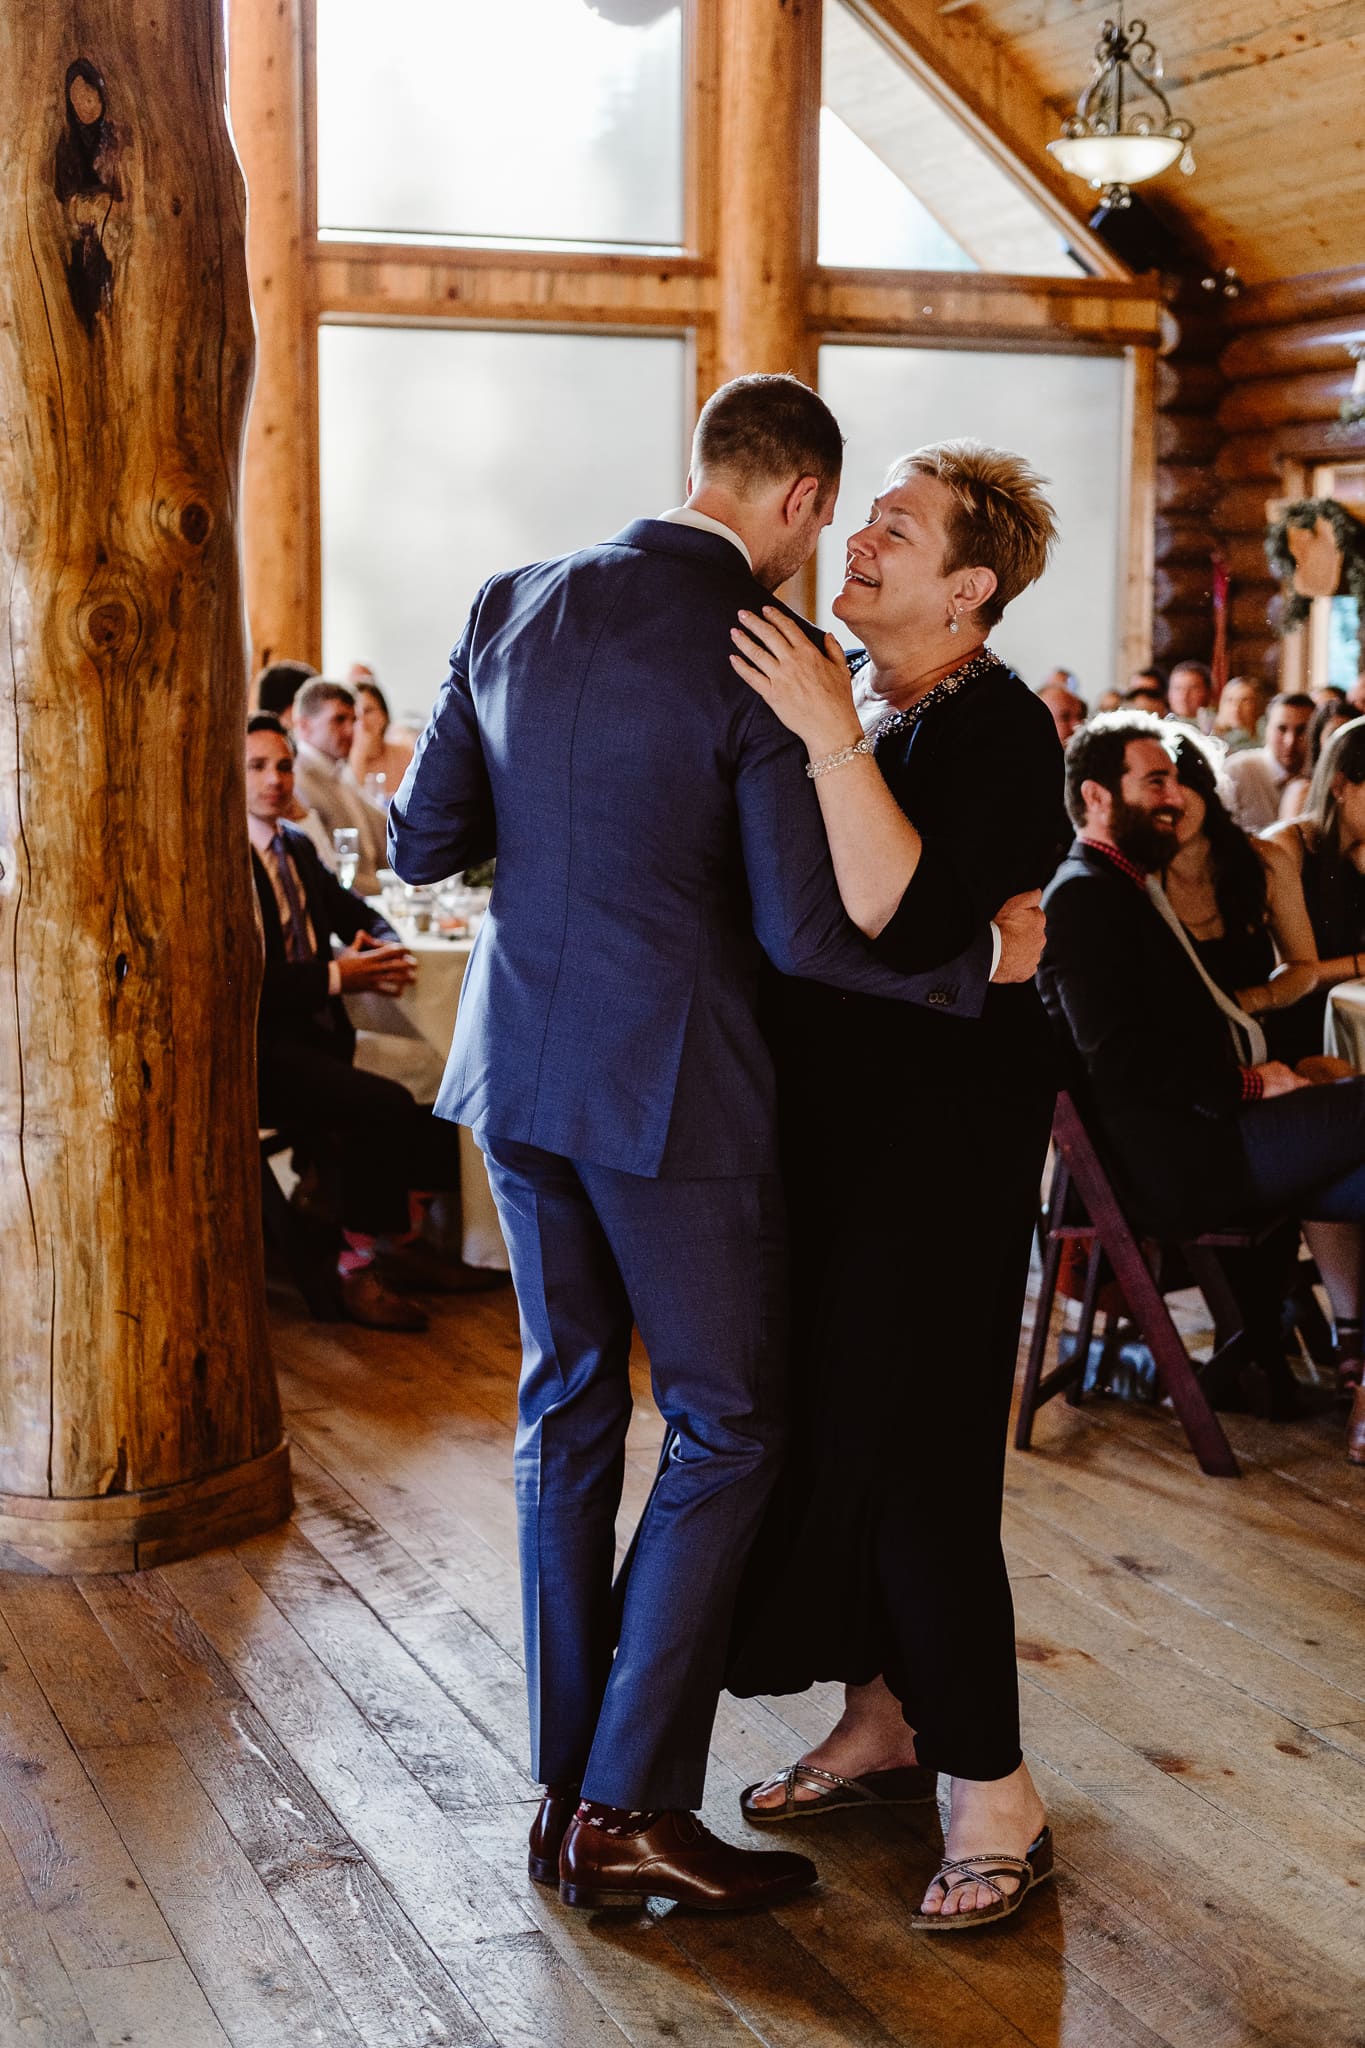 Bride dancing with her father at Breckenridge Nordic Center wedding, Summit County wedding photographer